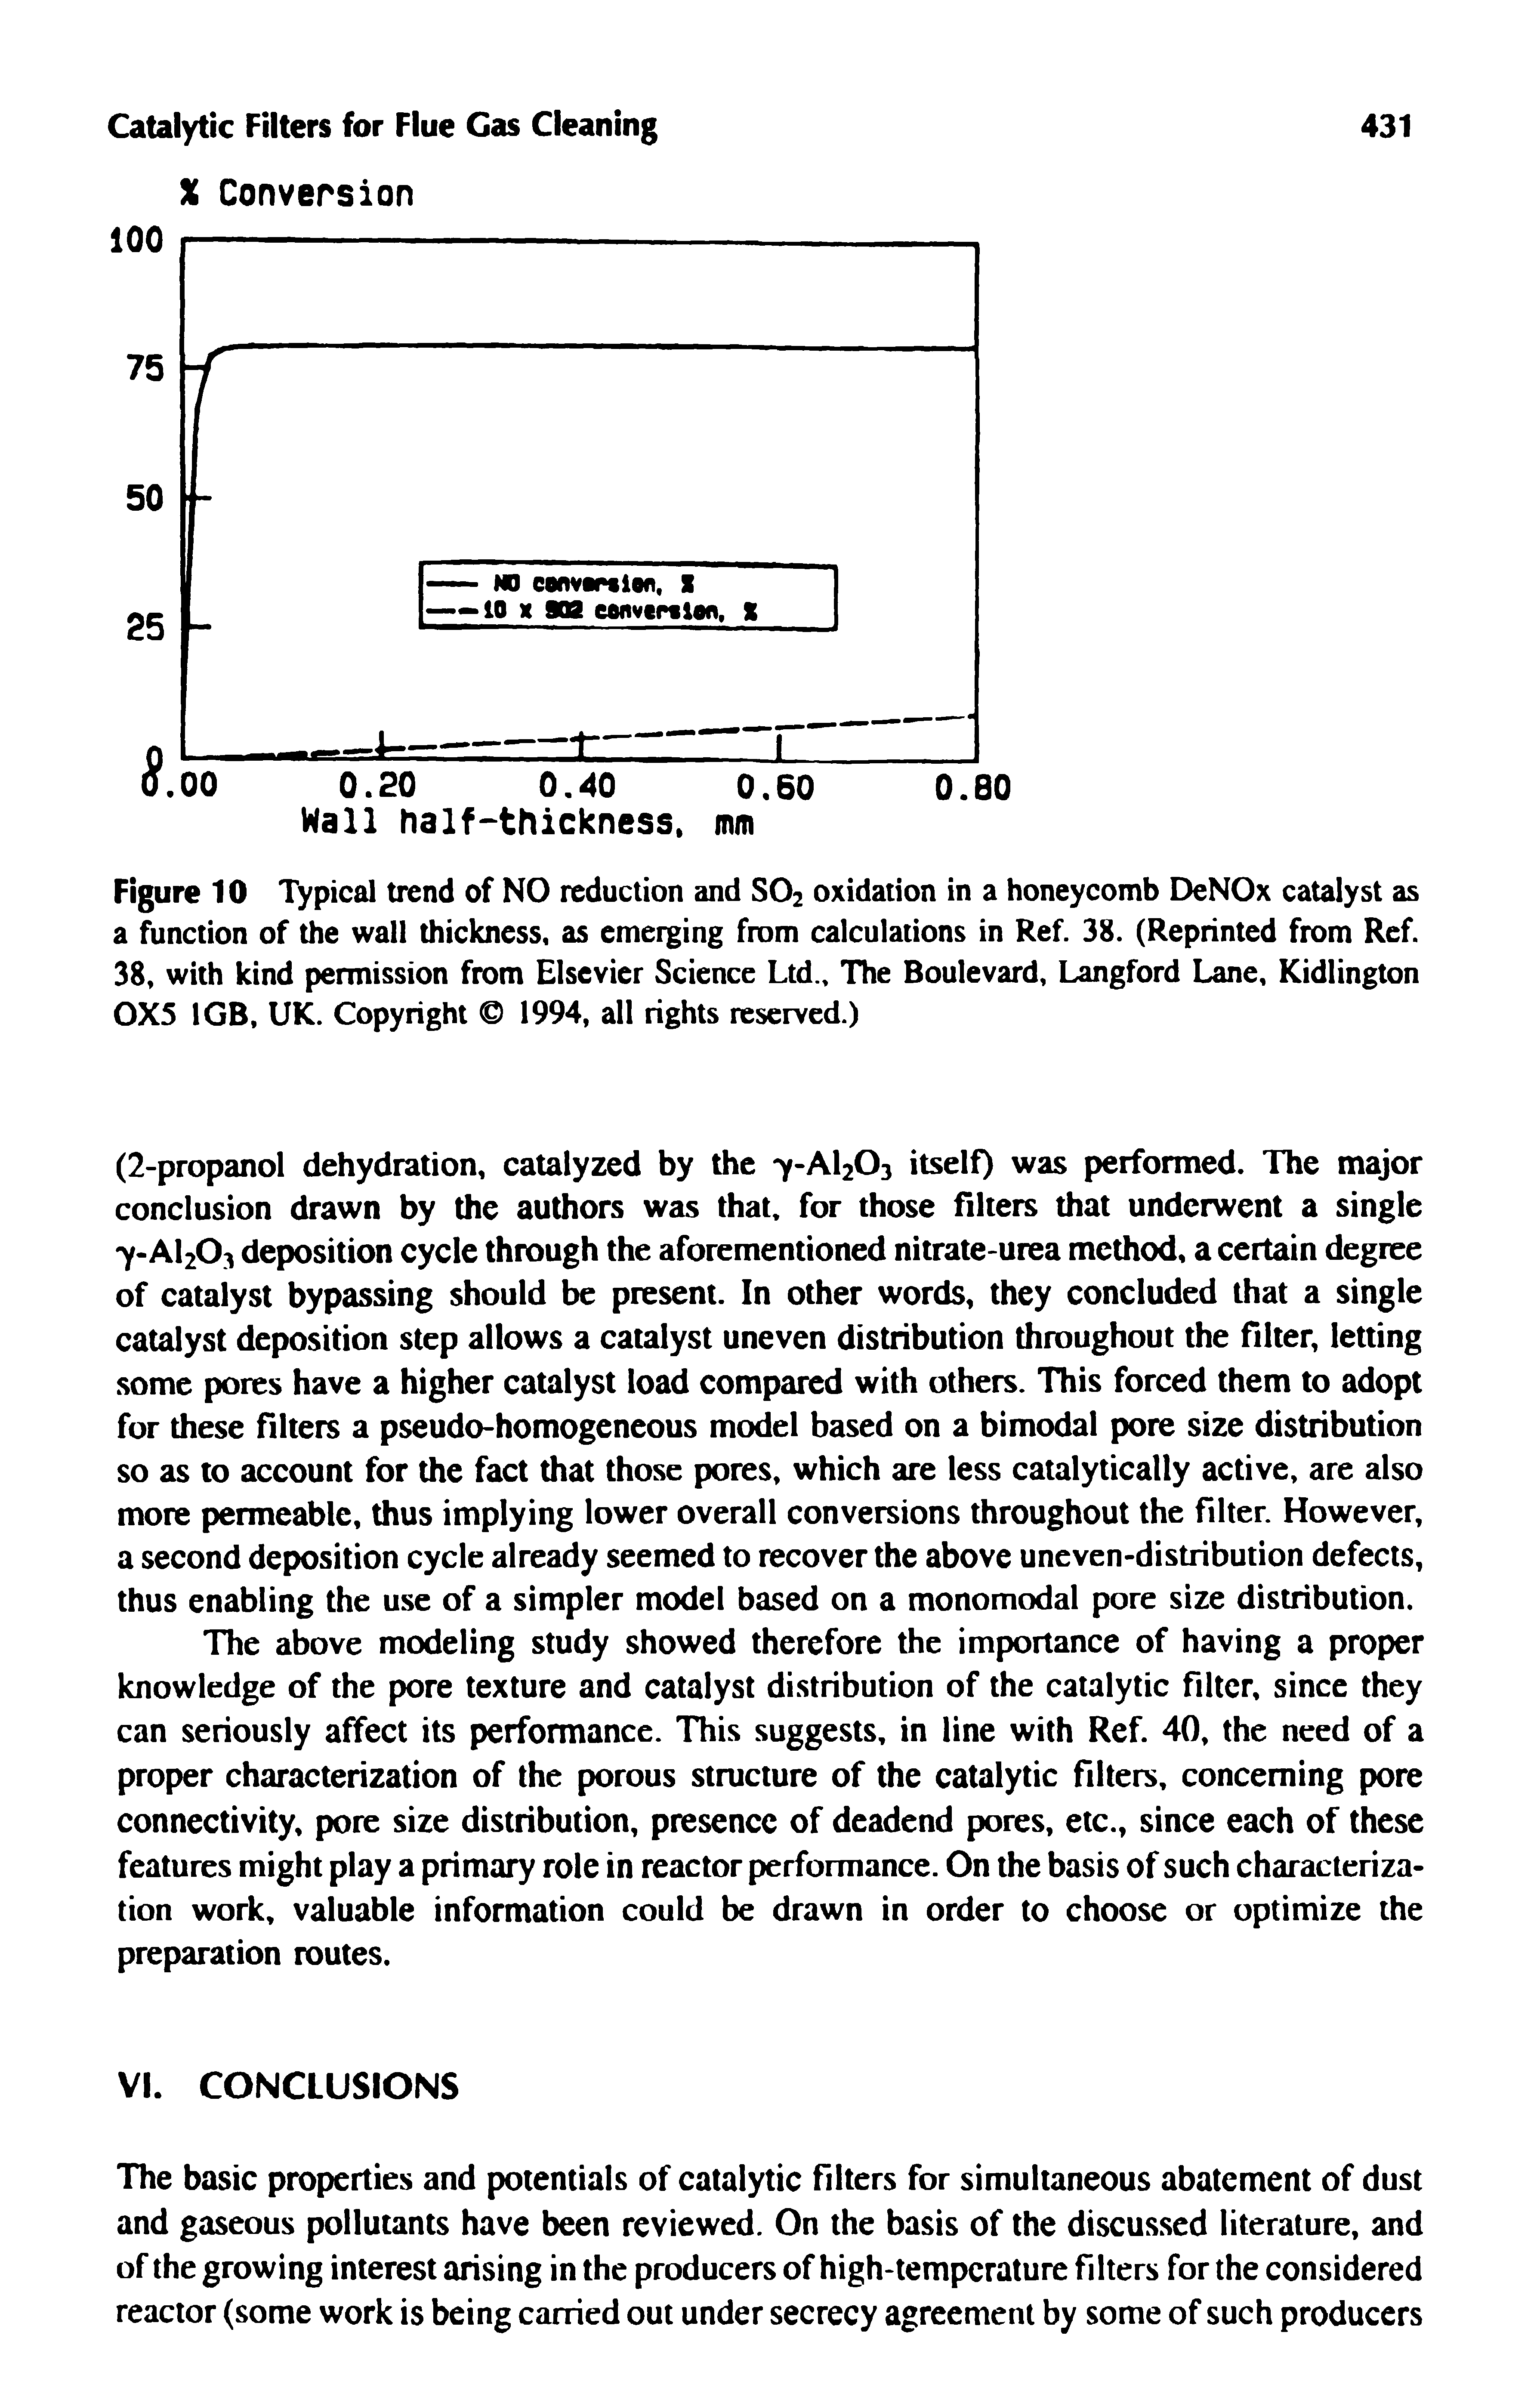 Figure 10 Typical trend of NO reduction and SO2 oxidation in a honeycomb DeNOx catalyst as a function of the wall thickness, as emerging from calculations in Ref. 38. (Reprinted from Ref. 38, with kind permission from Elsevier Science Ltd., The Boulevard, Langford Lane, Kidlington 0X5 1GB, UK. Copyright 1994, all rights reserved.)...